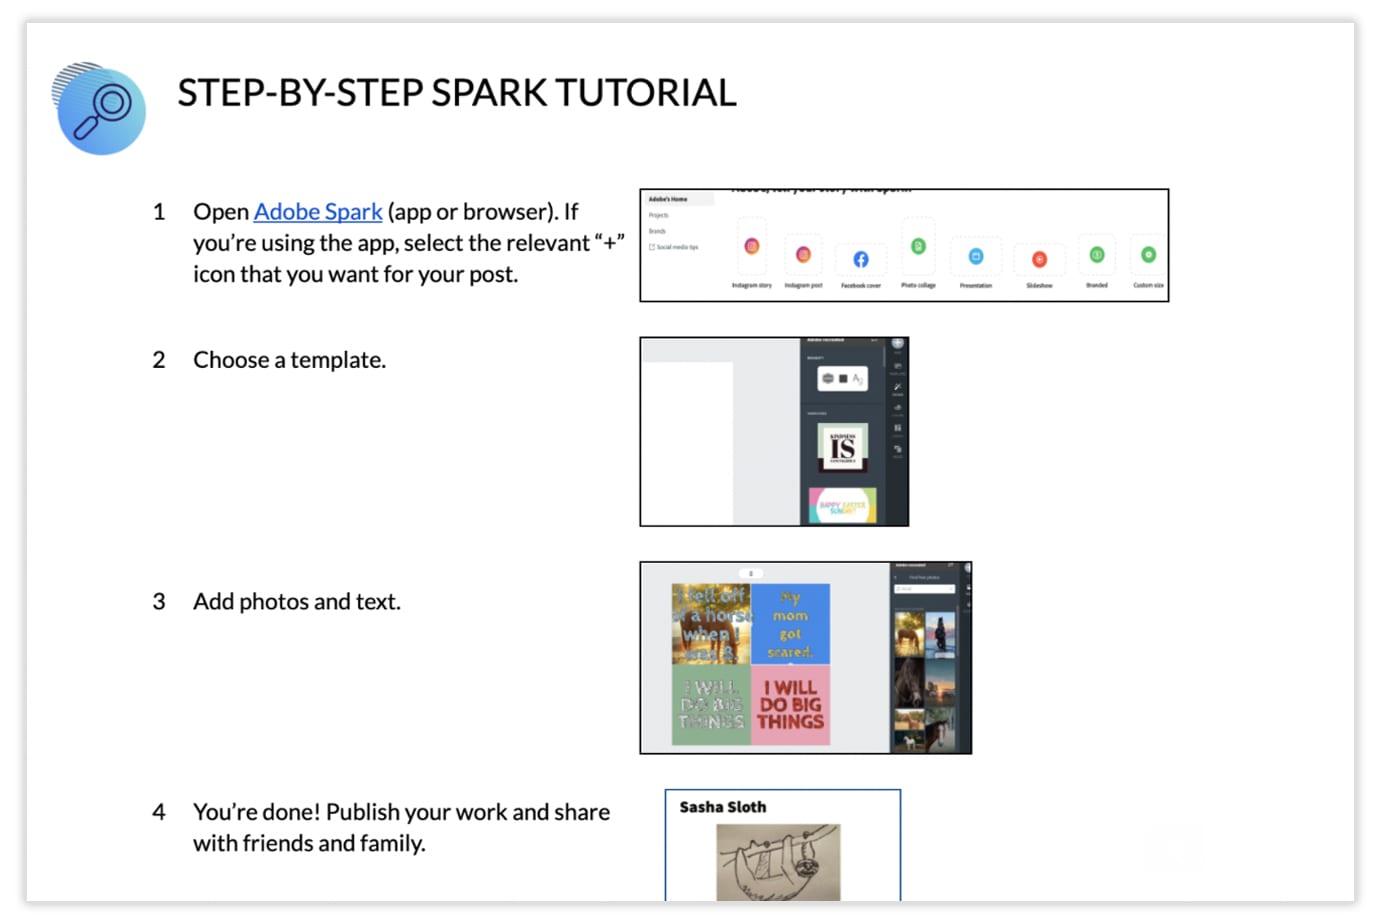 Adobe Education Spark Tutorial for teachers and students.